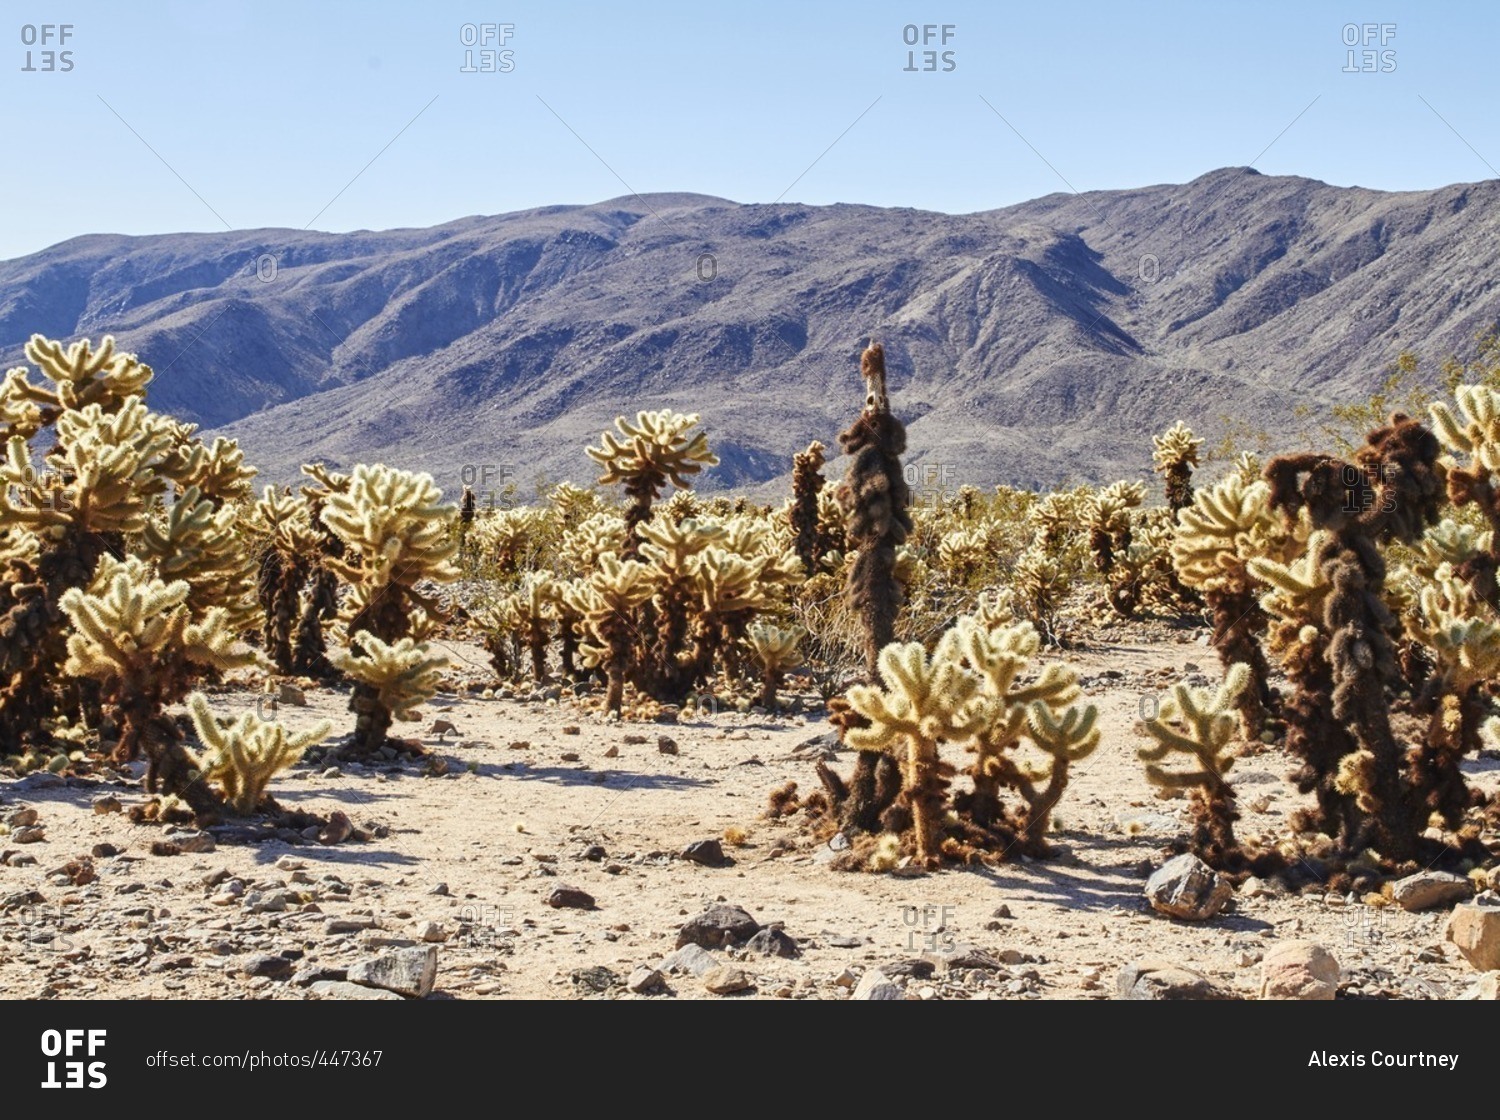 Cactus plants in western setting